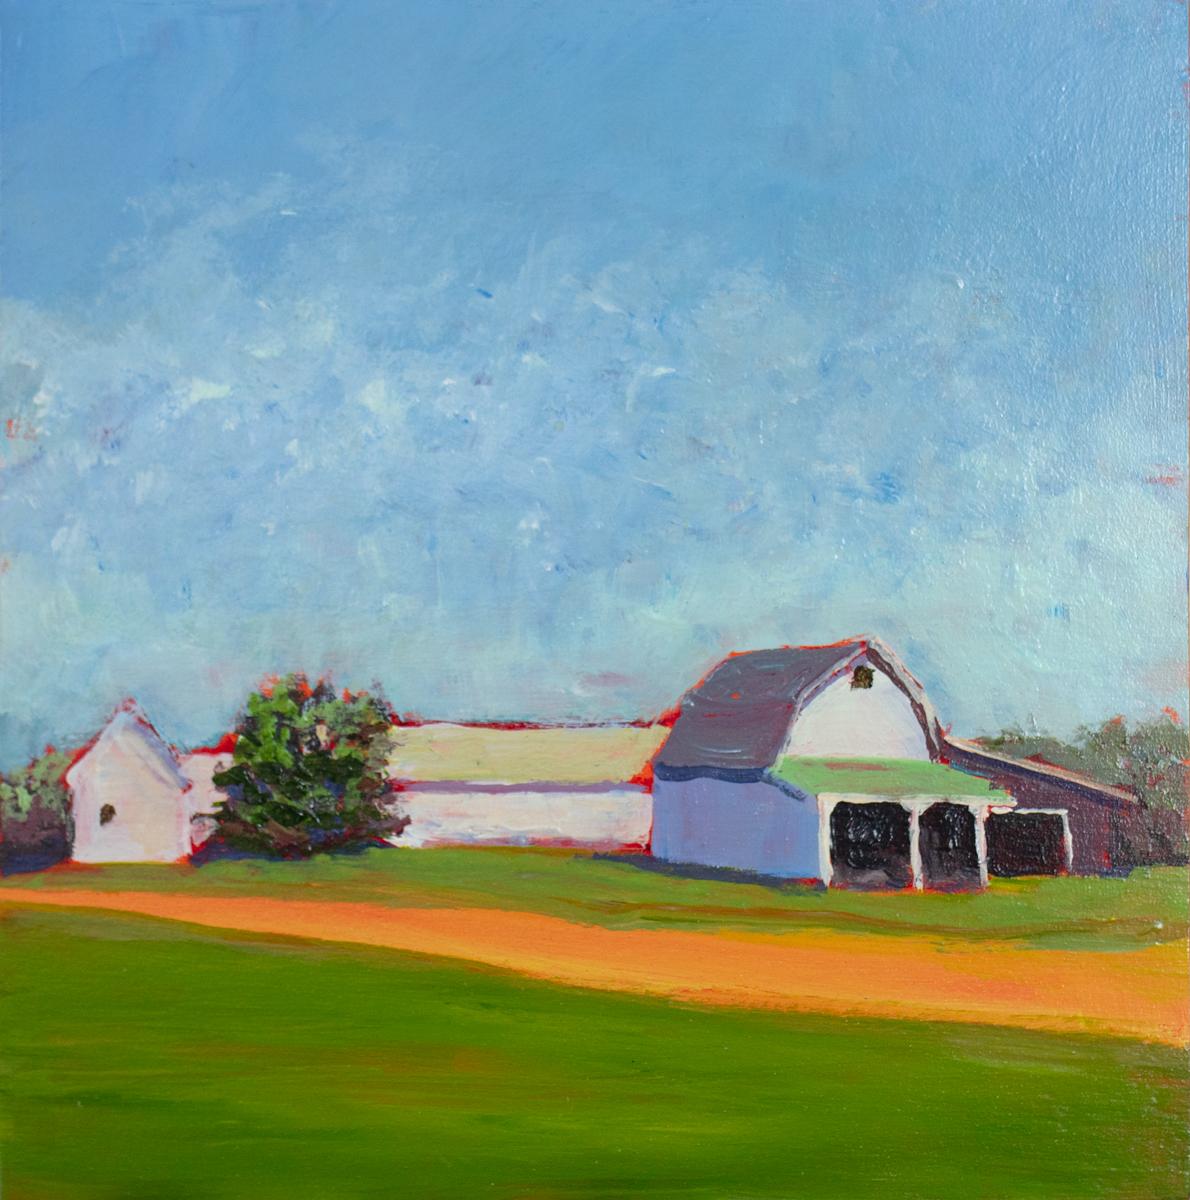 This small contemporary landscape painting by Carol Young features a colorful palette and captures a rural scene under a blue sky, with bright green grass contrasted by a warm orange road in the foreground. The painting is signed by the artist on